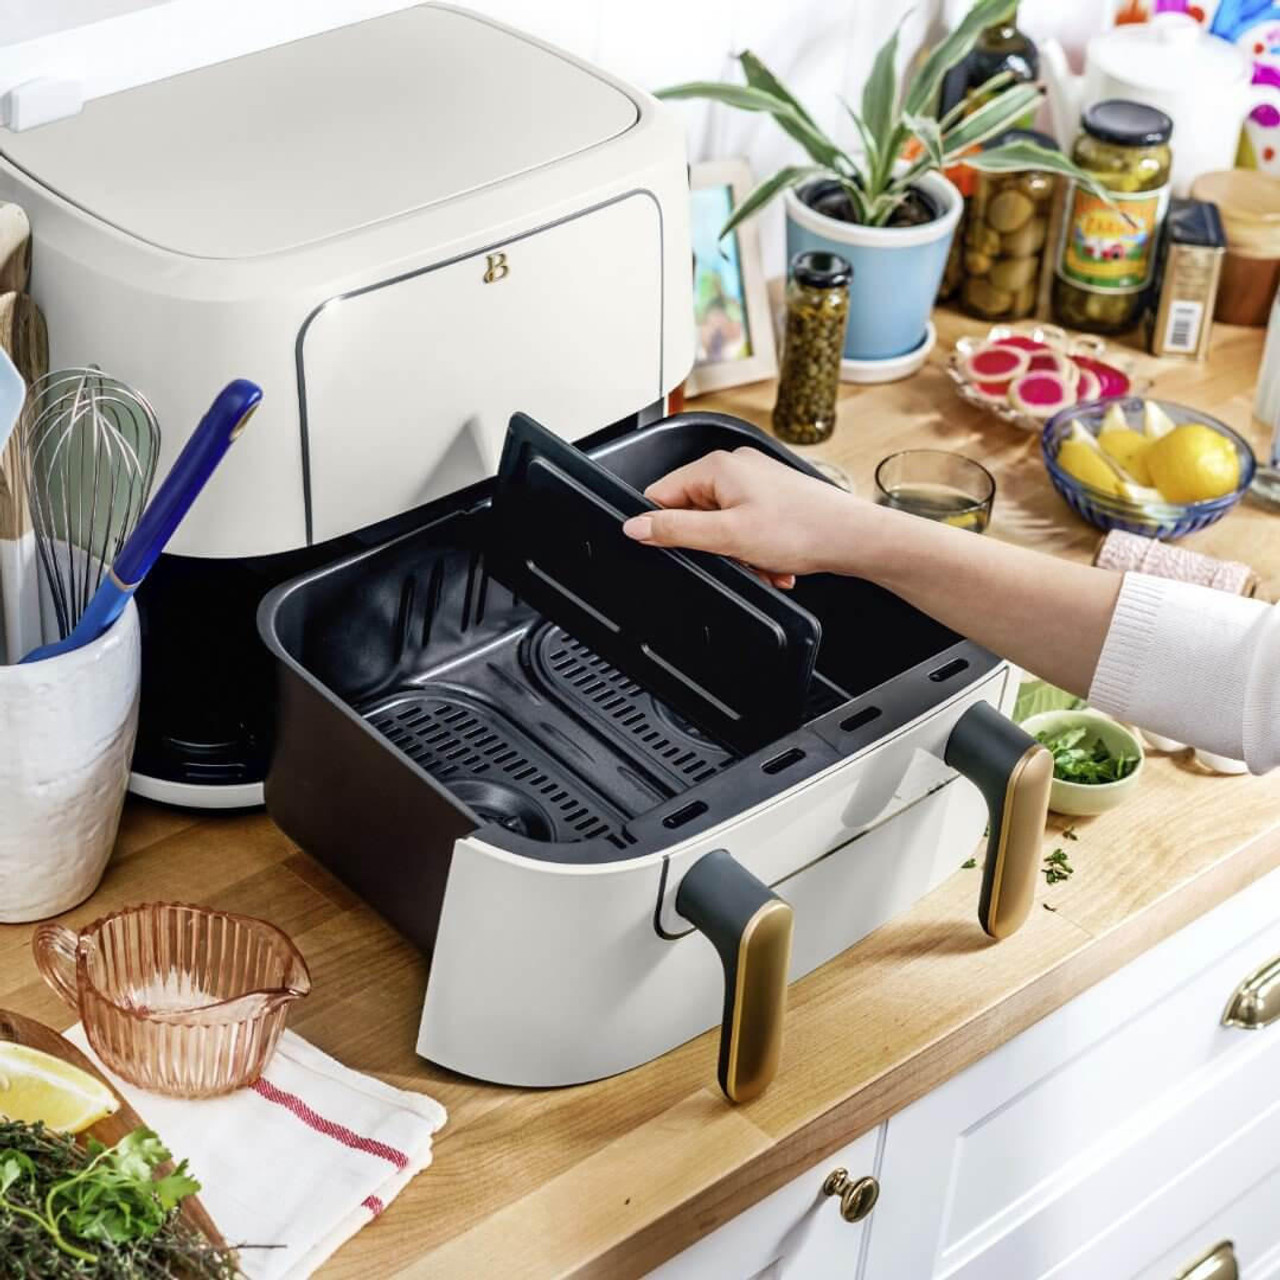 https://cdn11.bigcommerce.com/s-g5ygv2at8j/images/stencil/1280x1280/products/14017/29775/beautiful-9qt-trizone-air-fryer-by-drew-barrymore__65242.1688348548.jpg?c=1